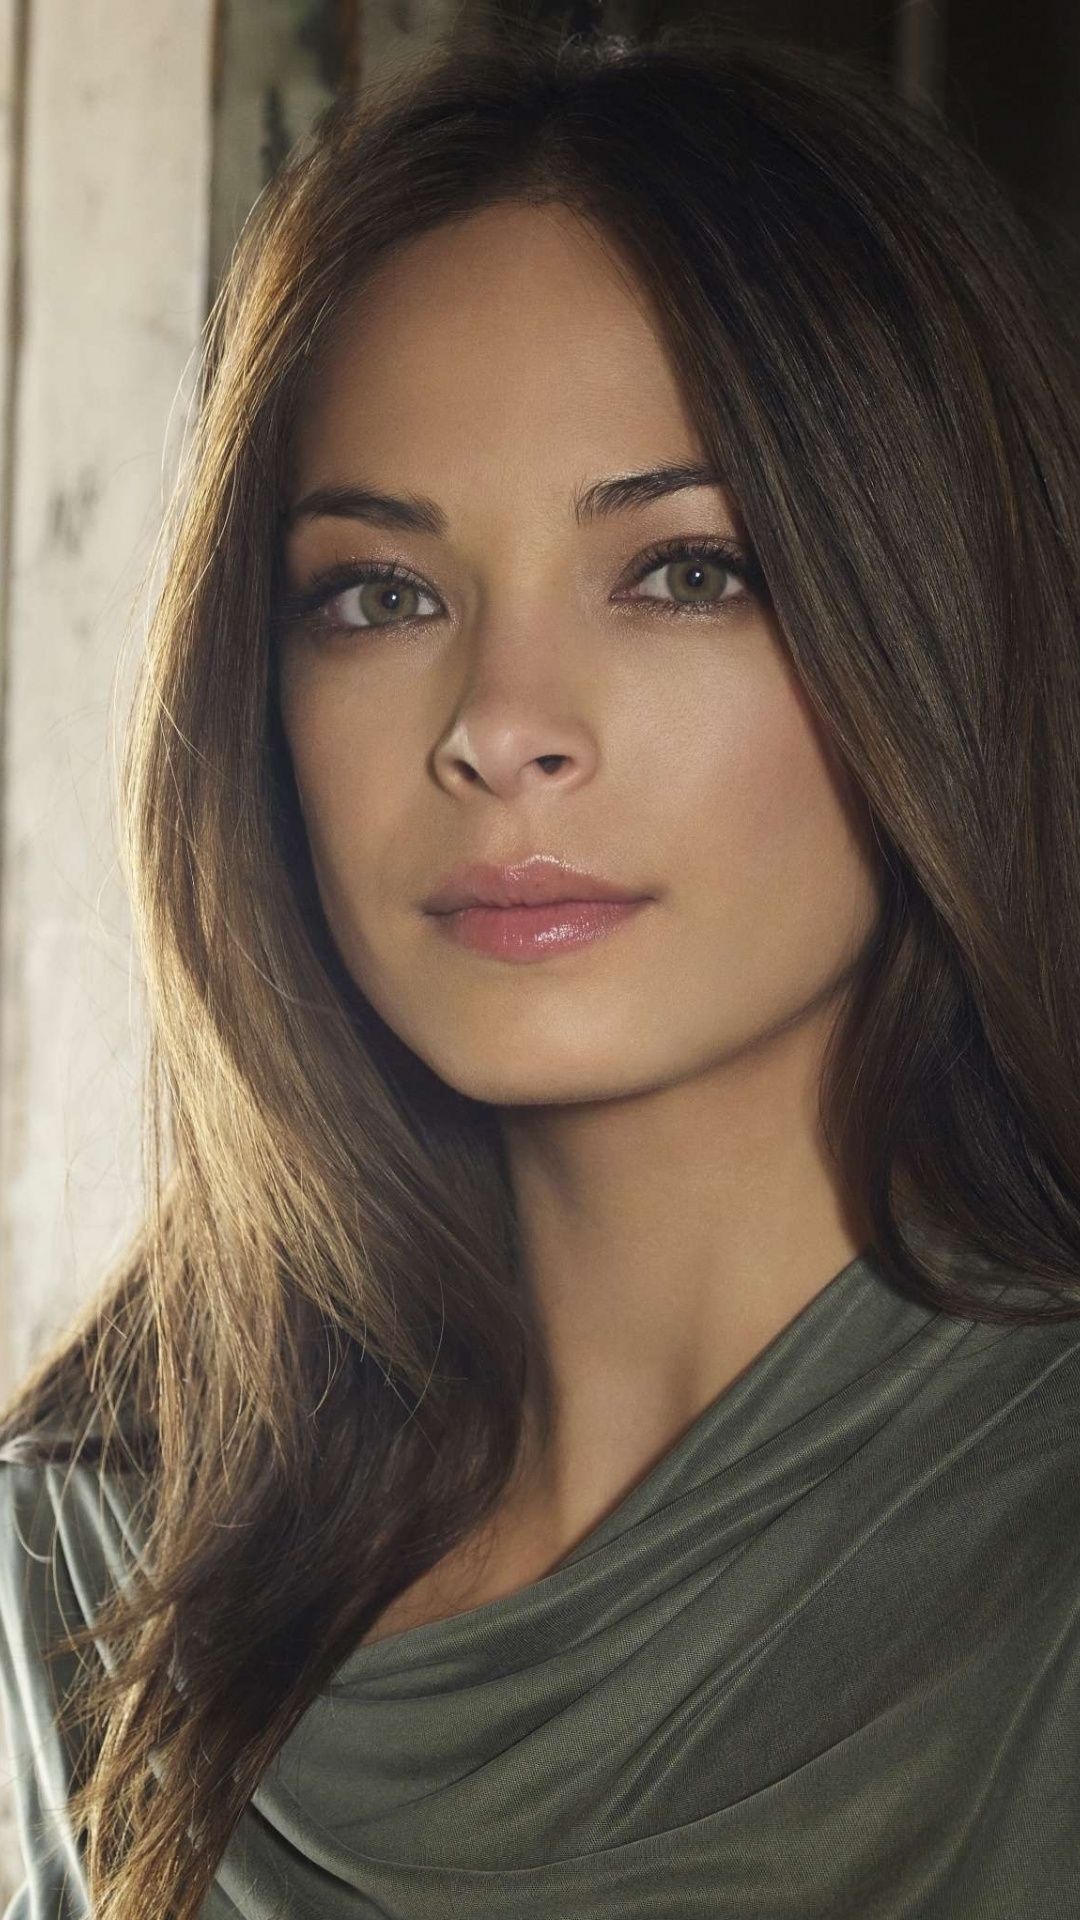 Most Beautiful Women: Kristin Kreuk, A Canadian actress, A role of Lana Lang in the superhero television series “Smallville”. 1080x1920 Full HD Wallpaper.